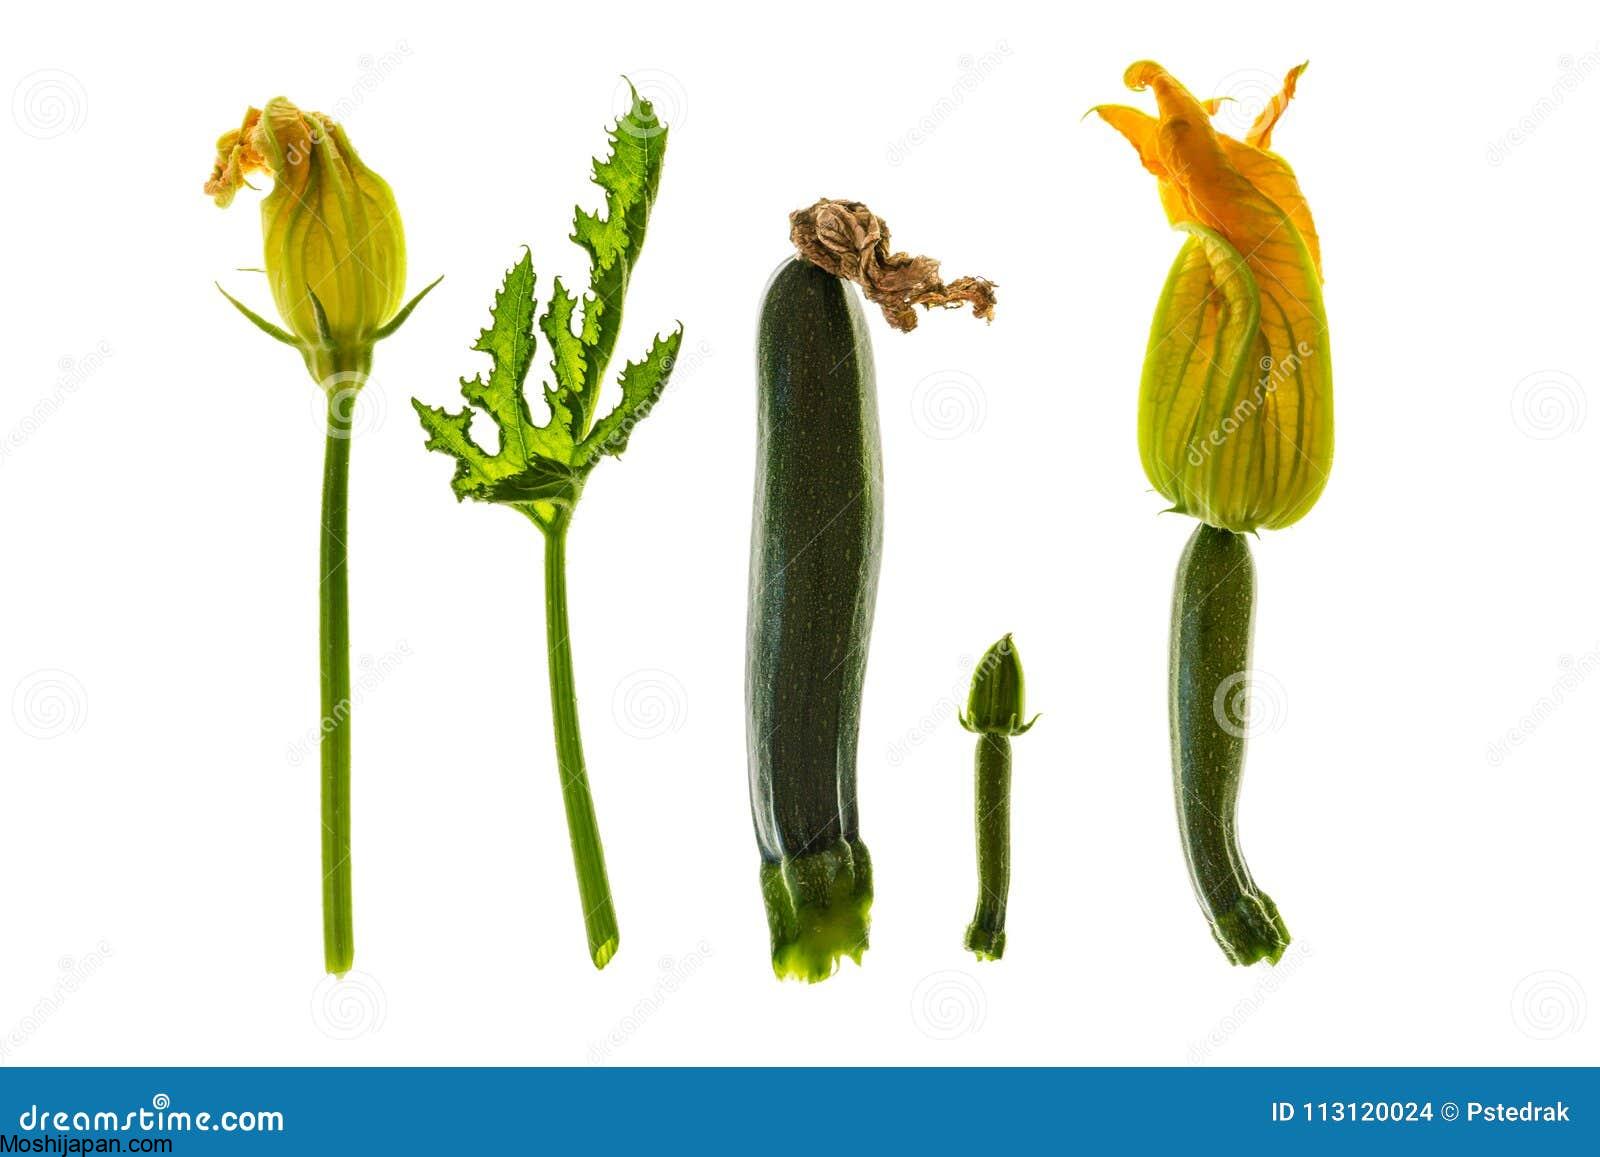 Zucchini Growth Stages: How Fast Does Zucchini Grow? 3